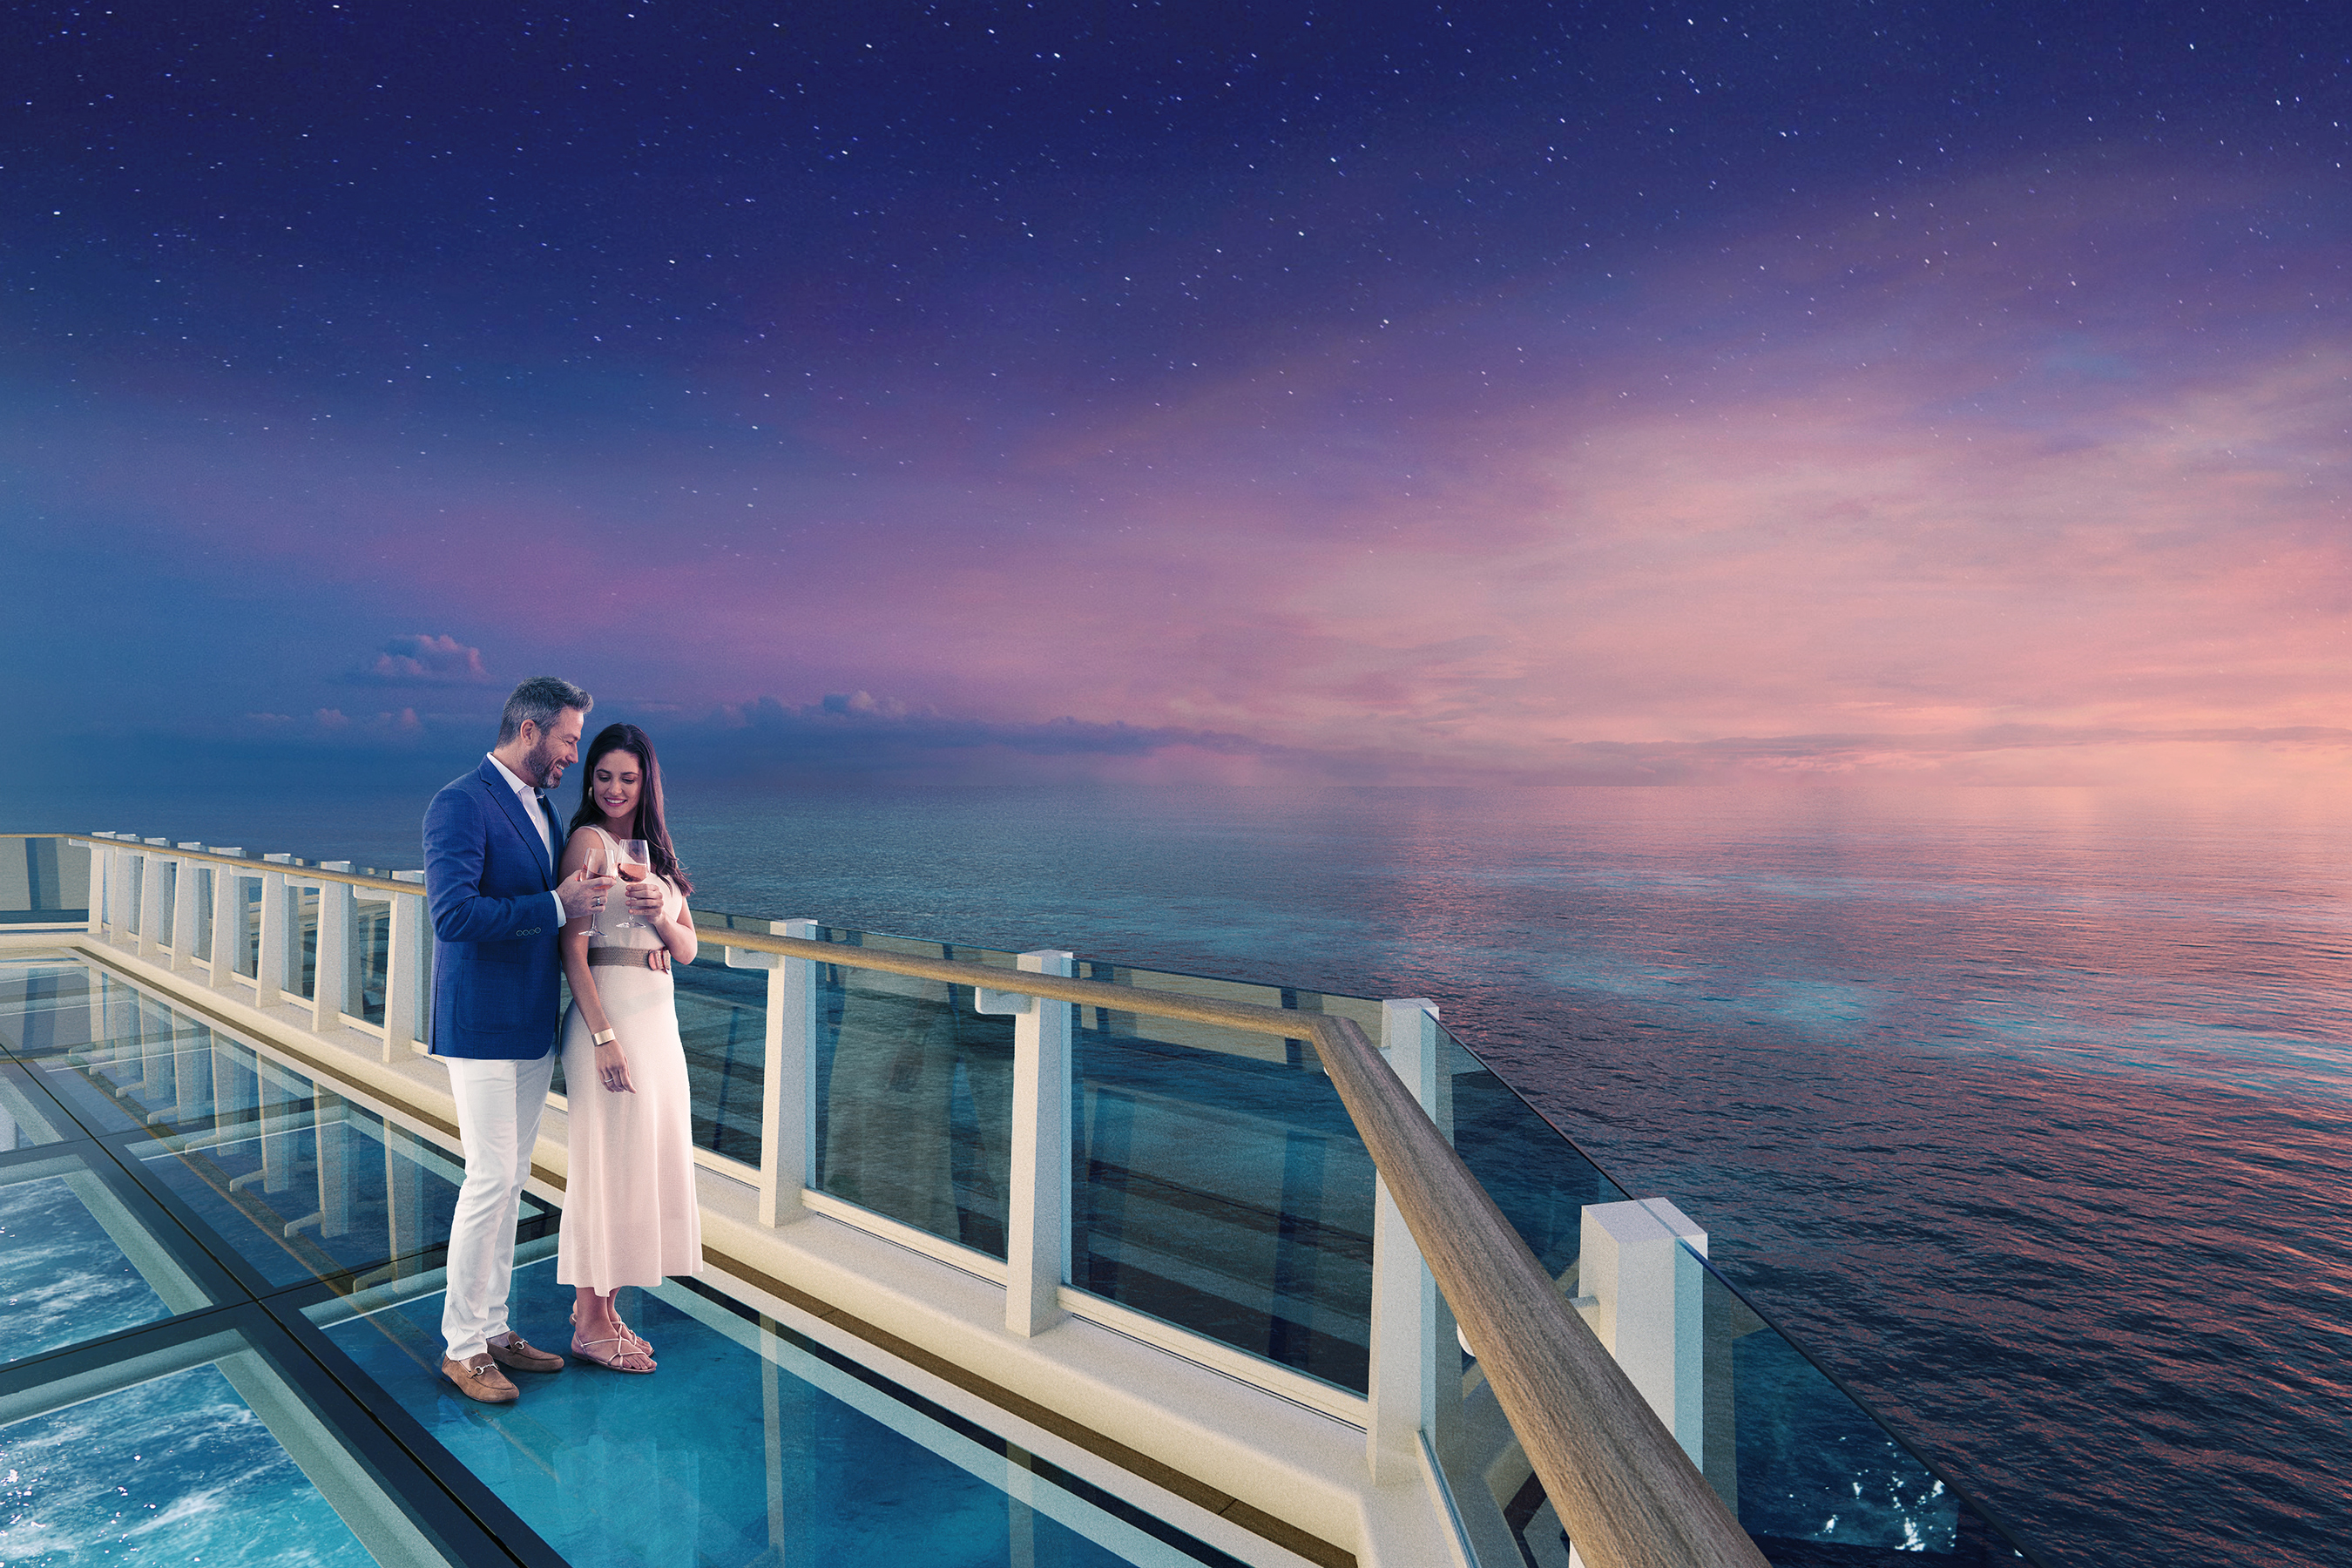 Norwegian Viva's Ocean Boulevard, the 44,000 square foot outdoor walkway which wraps around the entire ship, will feature Oceanwalk, two glass bridges situated above water.